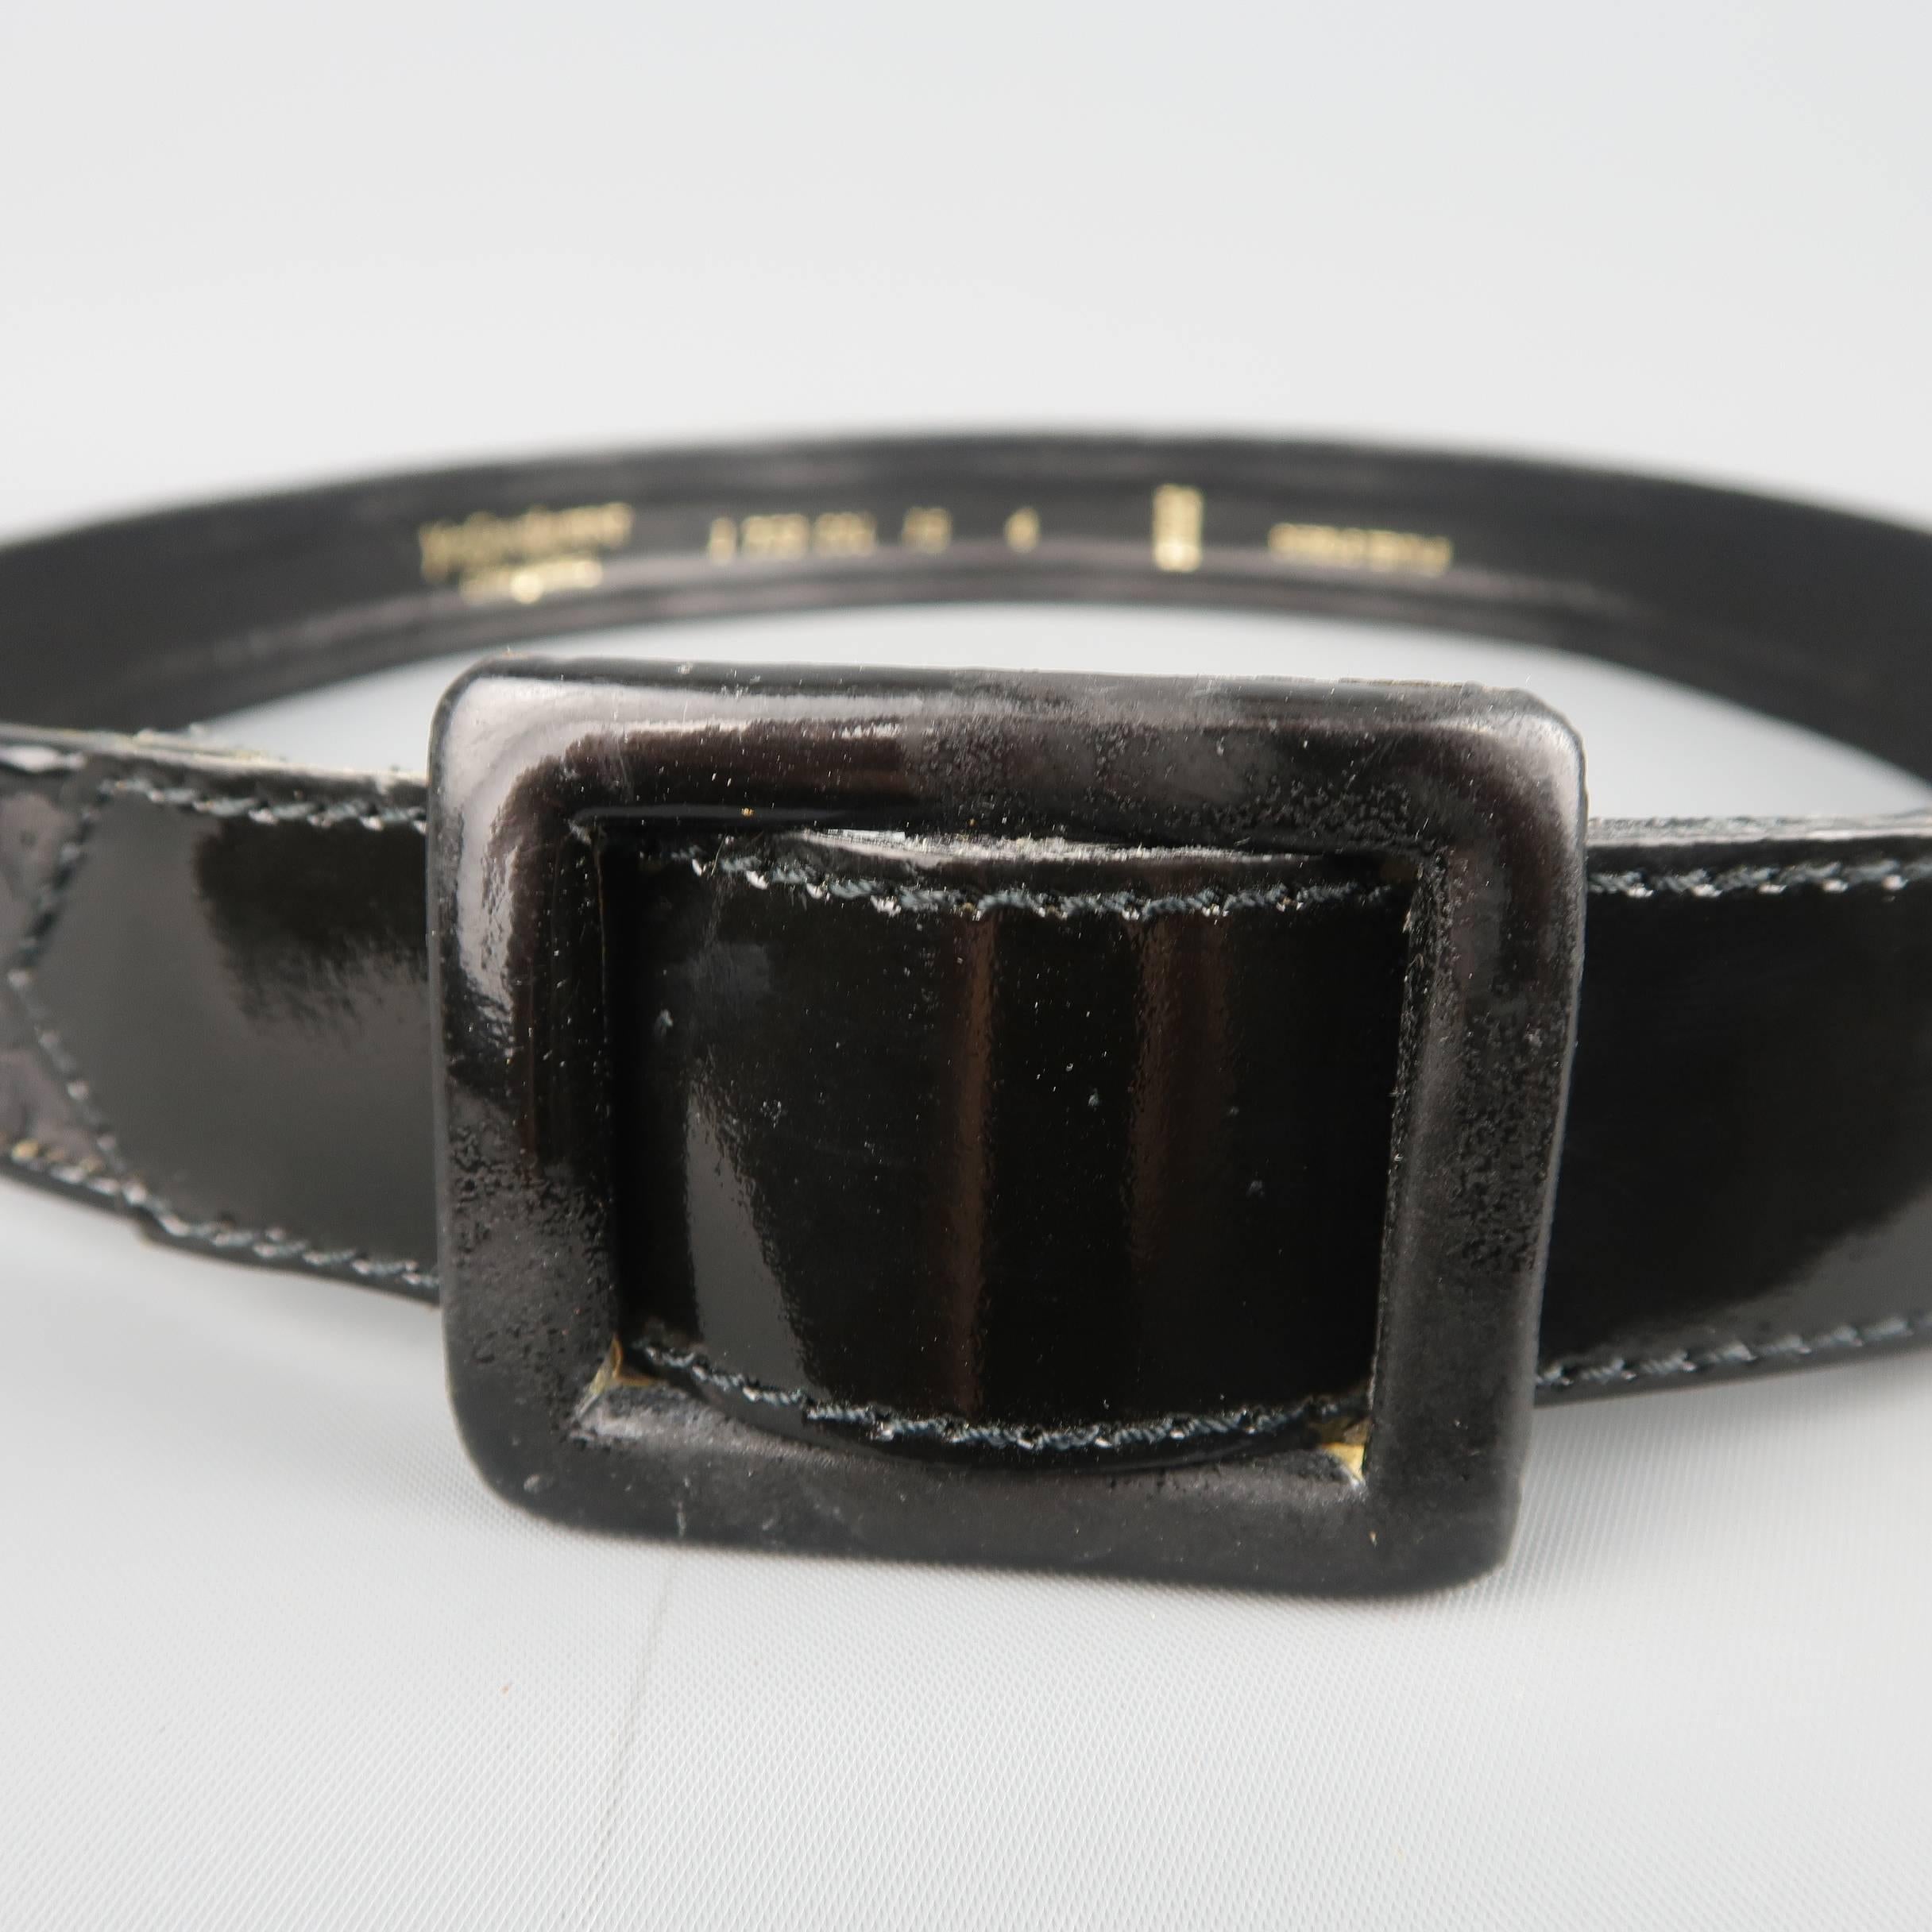 Vintage YVES SAINT LAURENT Rive Gauche belt features a  black sequin patent leather strap with leather square buckle. Minor wear. Made in France.
 
Good Pre-Owned Condition.
Marked: 1 753 COL 15 4
 
Length: 35 in.
Width: 1.25 in.
Fits: 33 in.

SKU: